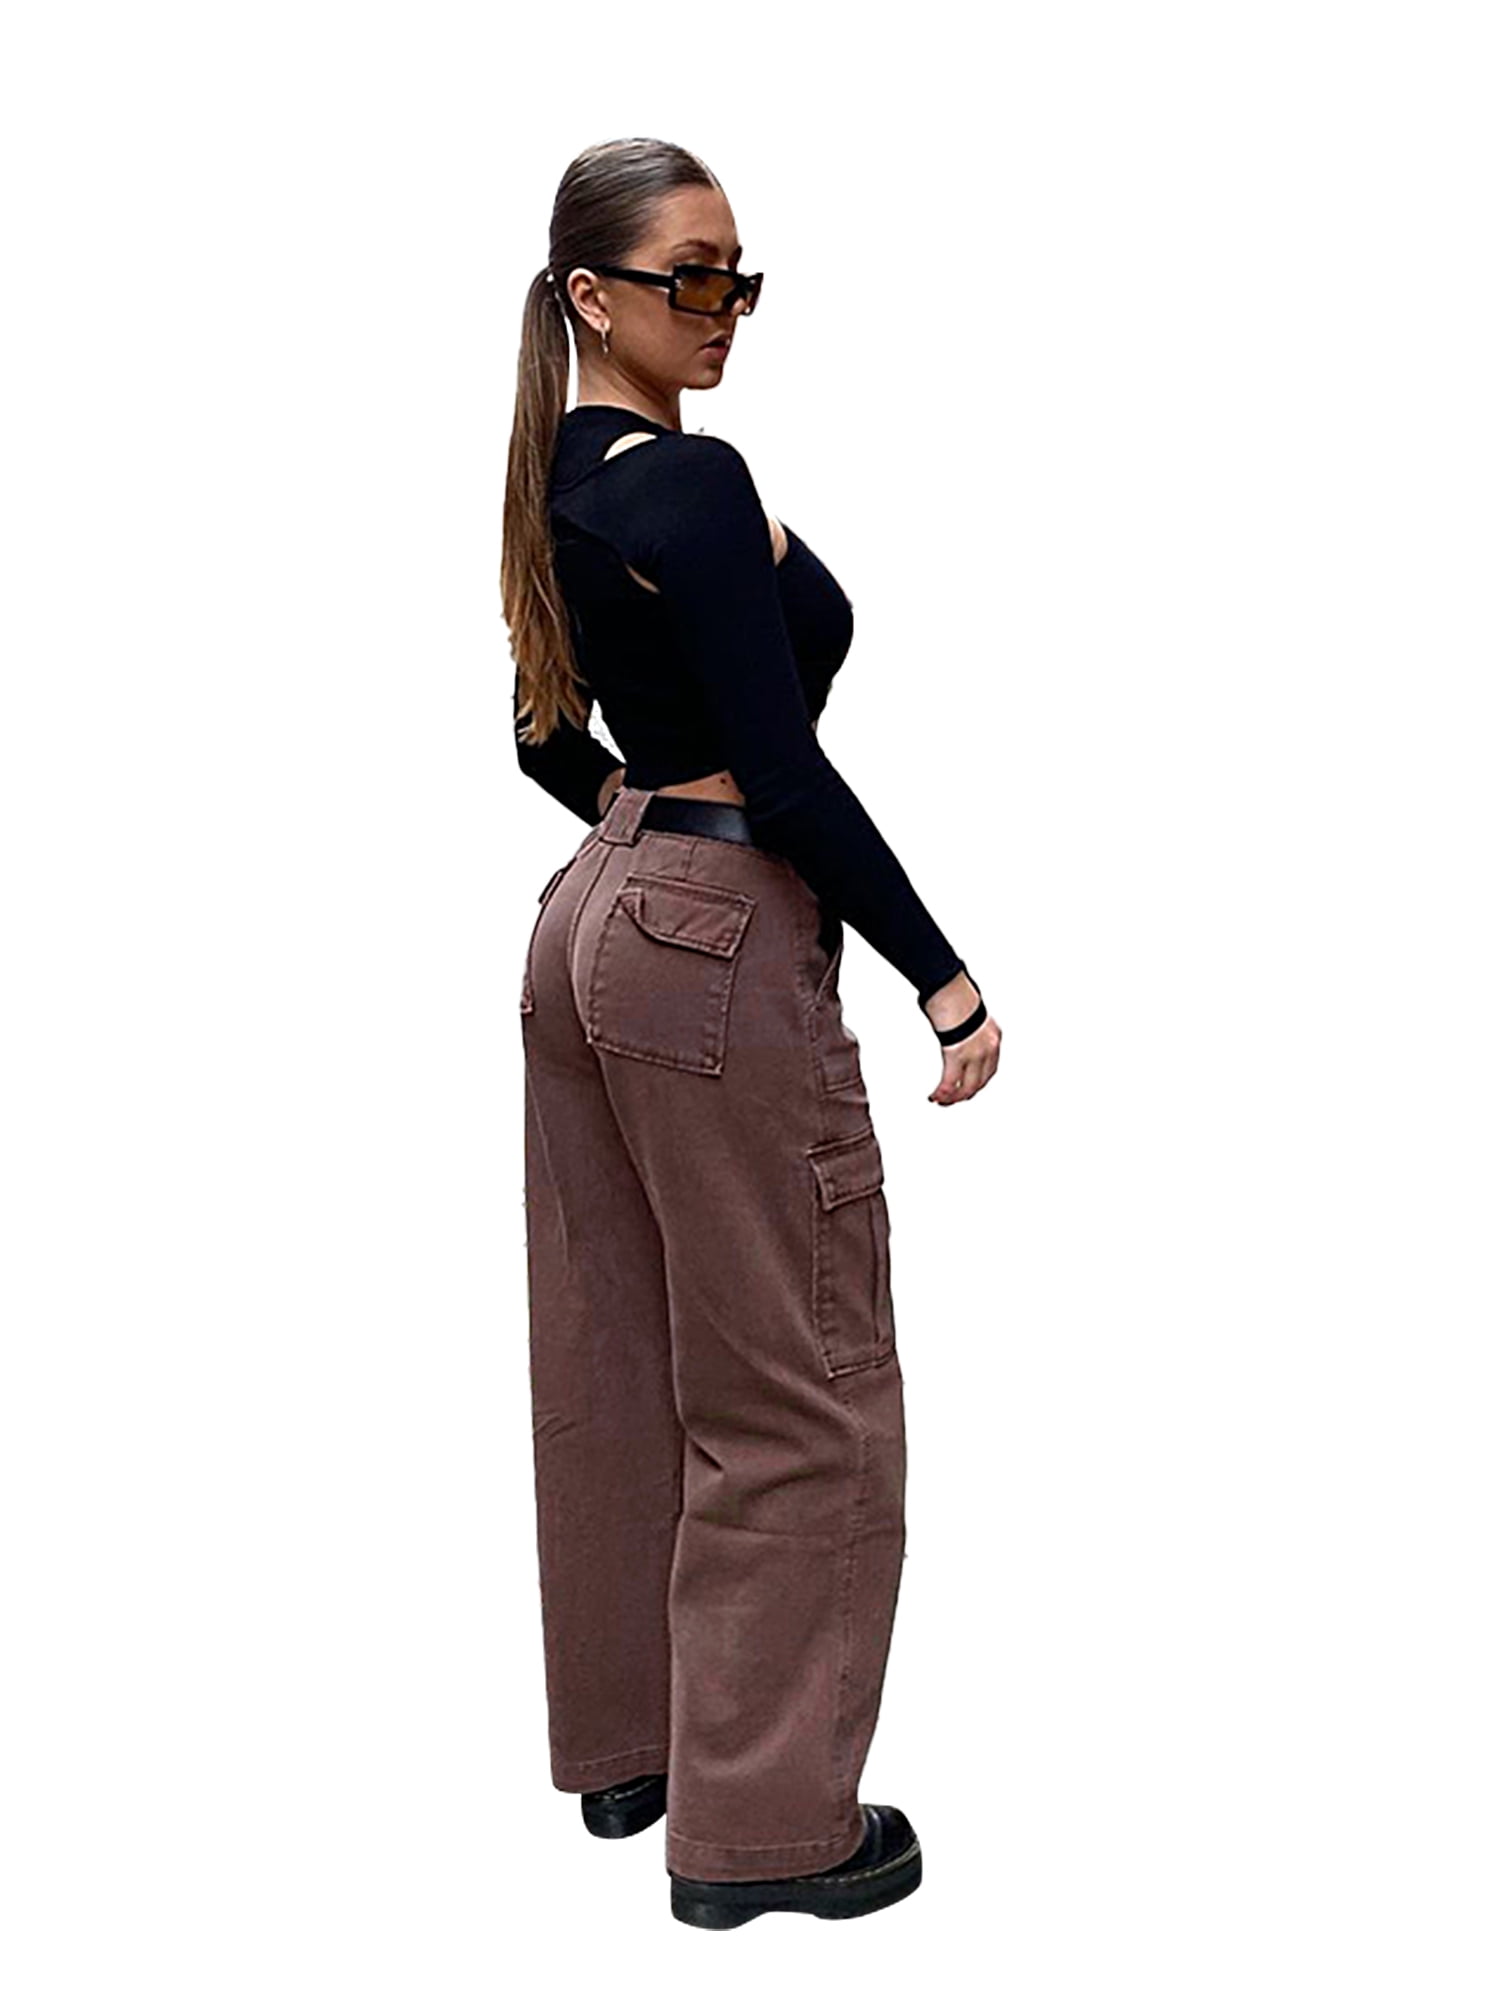 Woman in black brassiere and brown pants standing on road during daytime  photo  Free Apparel Image on Unsplash